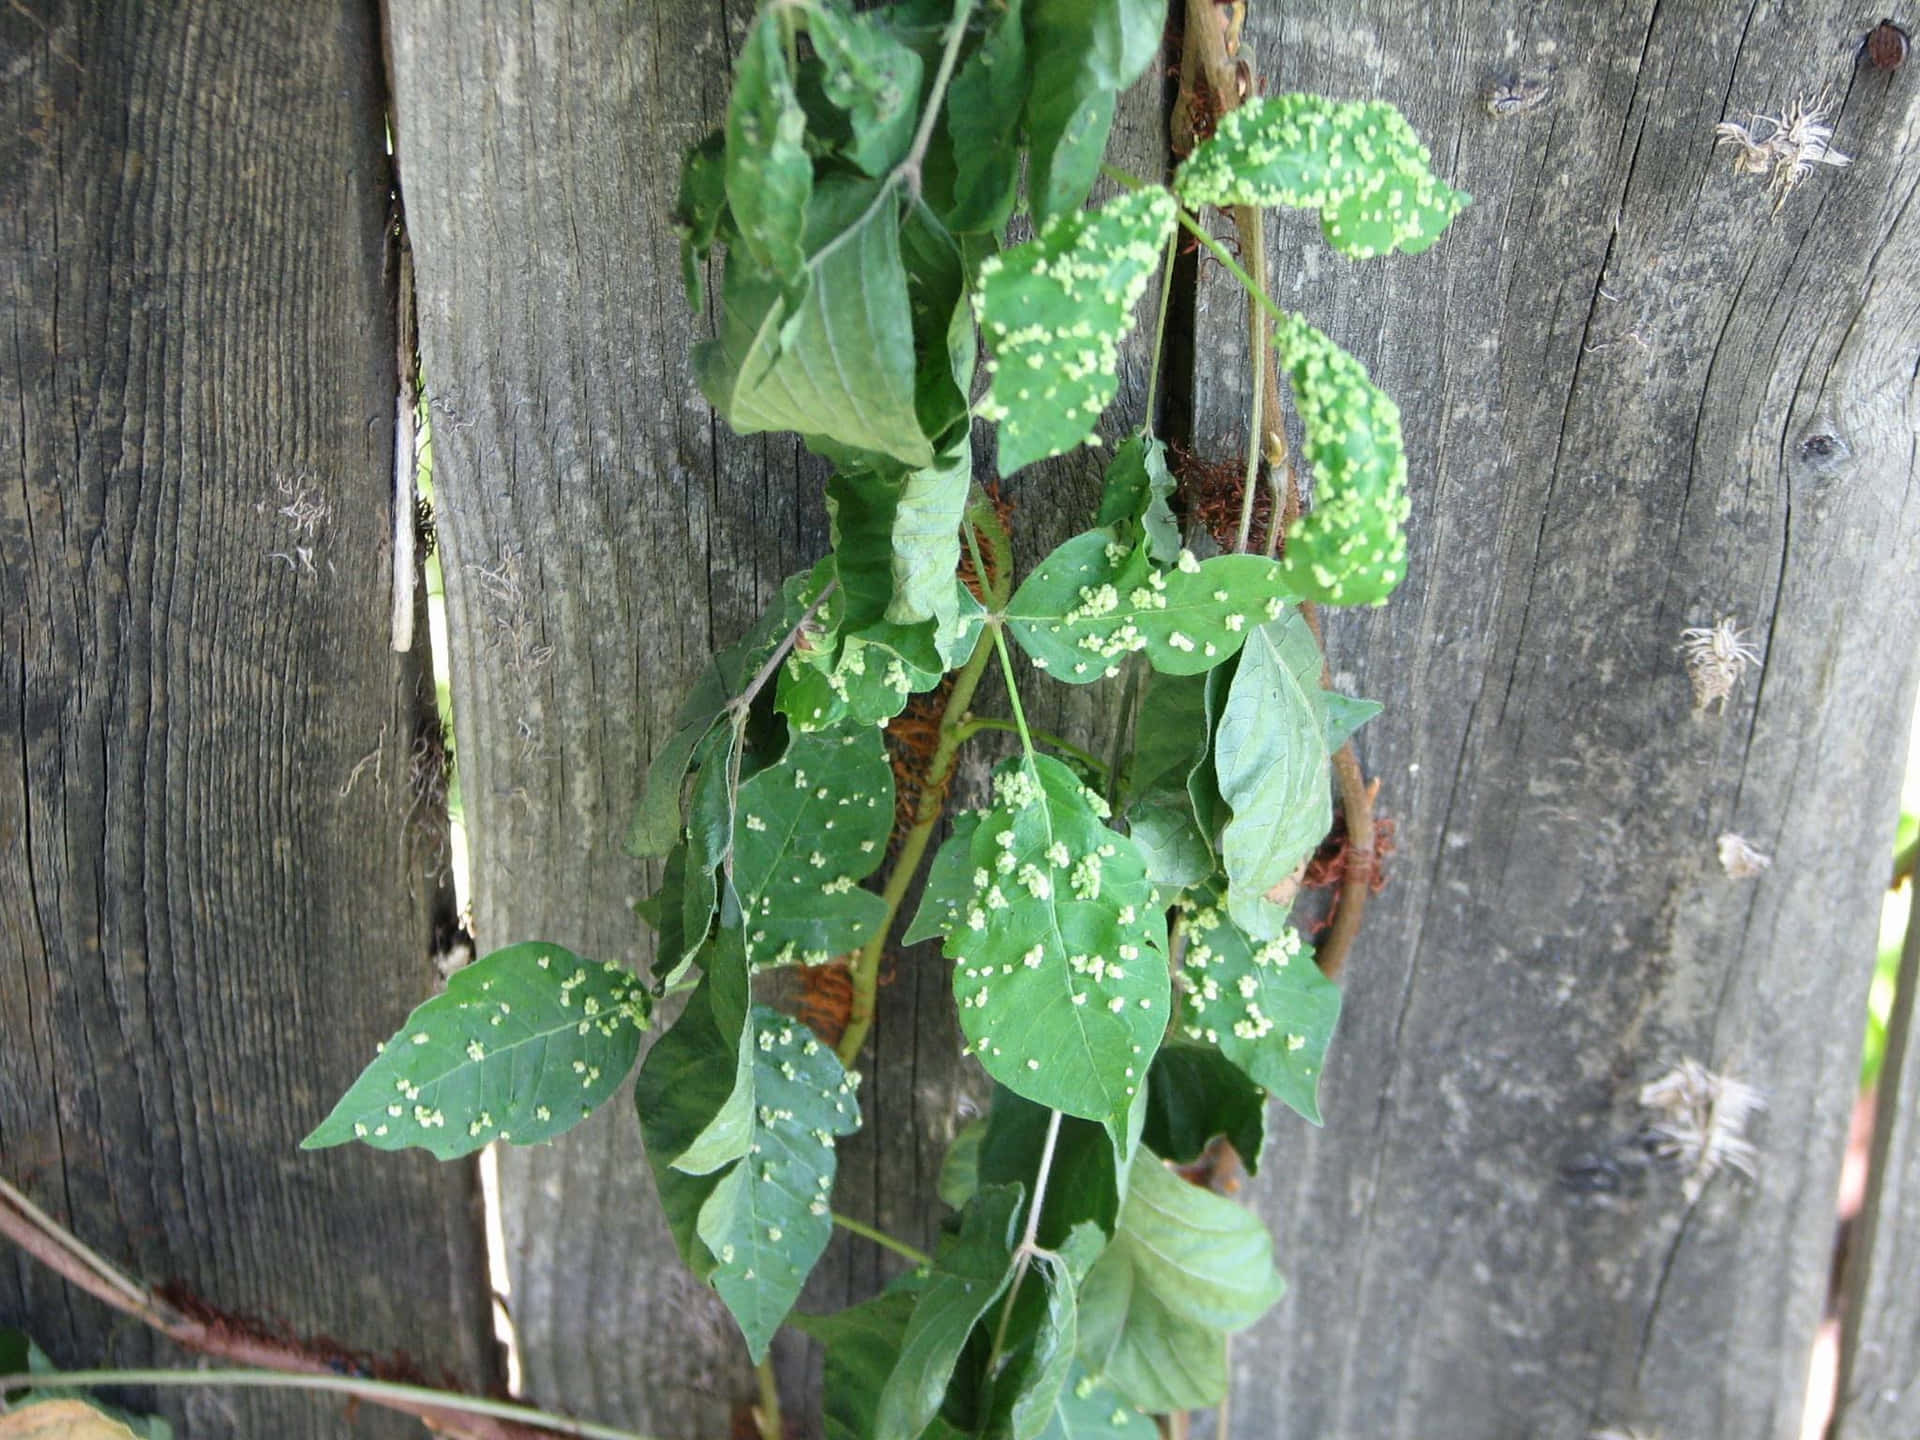 A close-up of a poison ivy plant